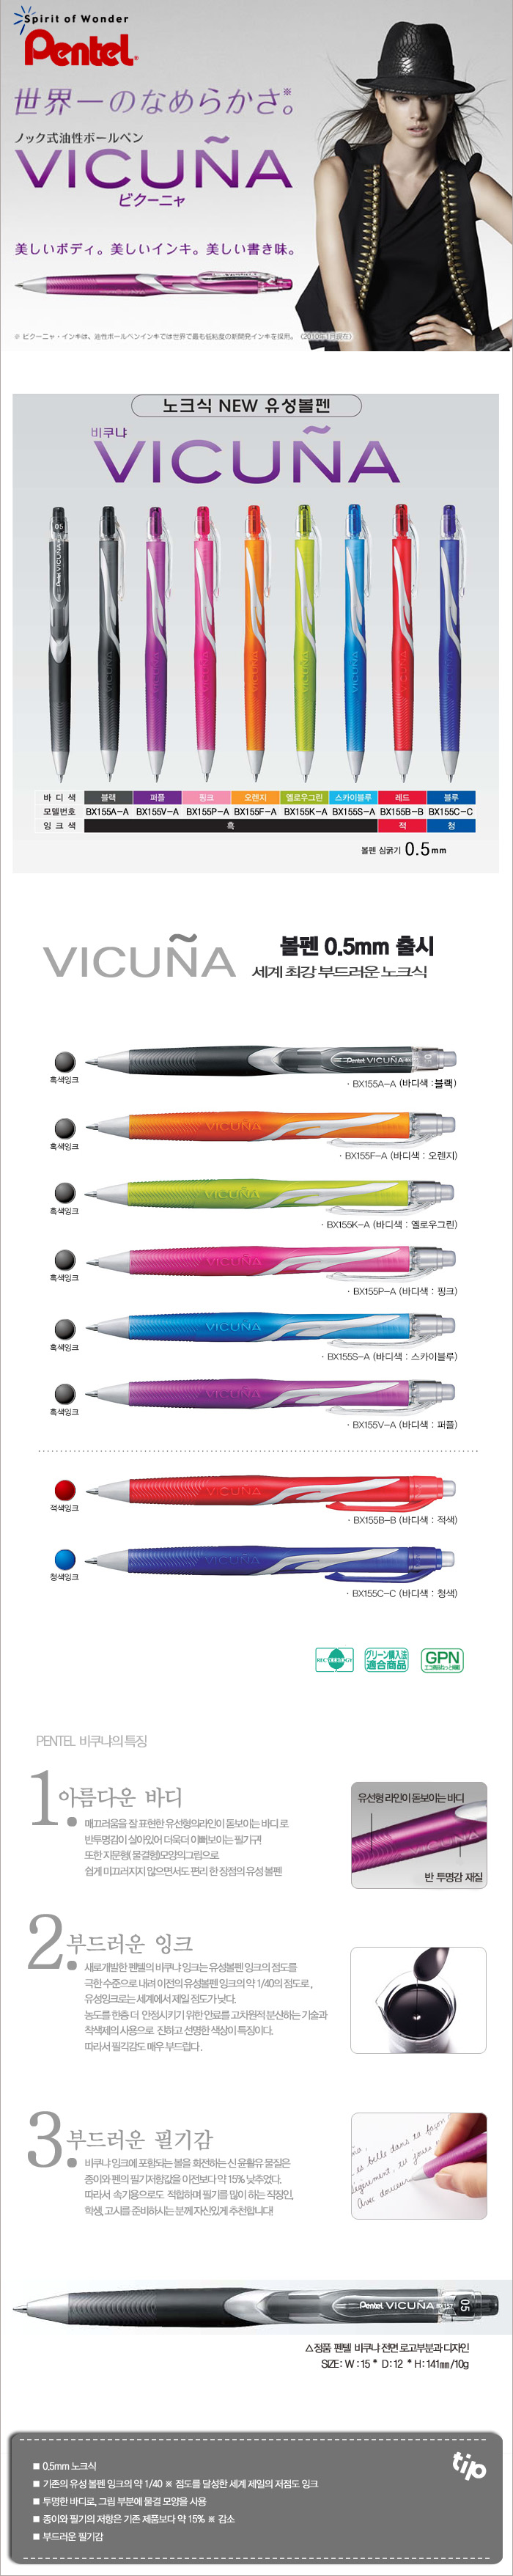 New / Genuine Pentel / vicuna / Vicuna / Vicuna / ballpoint pen / (BX155) / 0.5mm ballpoint pen / low-viscosity ink / jet stream rival